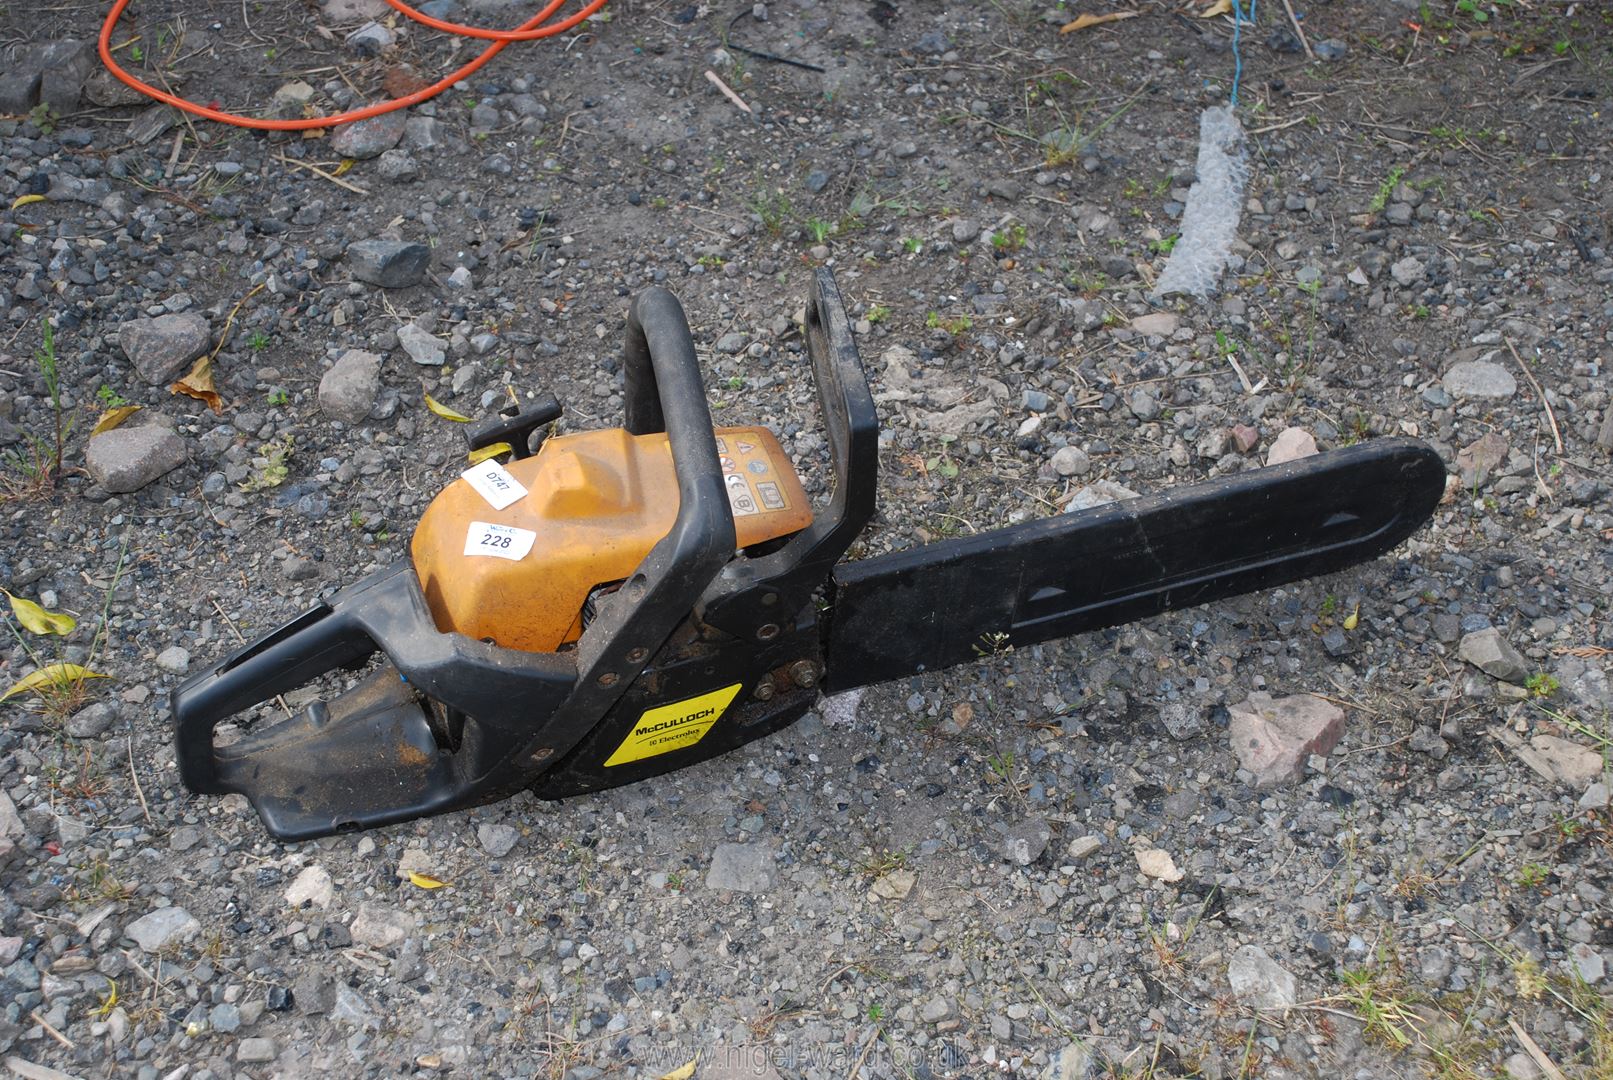 A McCullock 335 Chainsaw (running order).